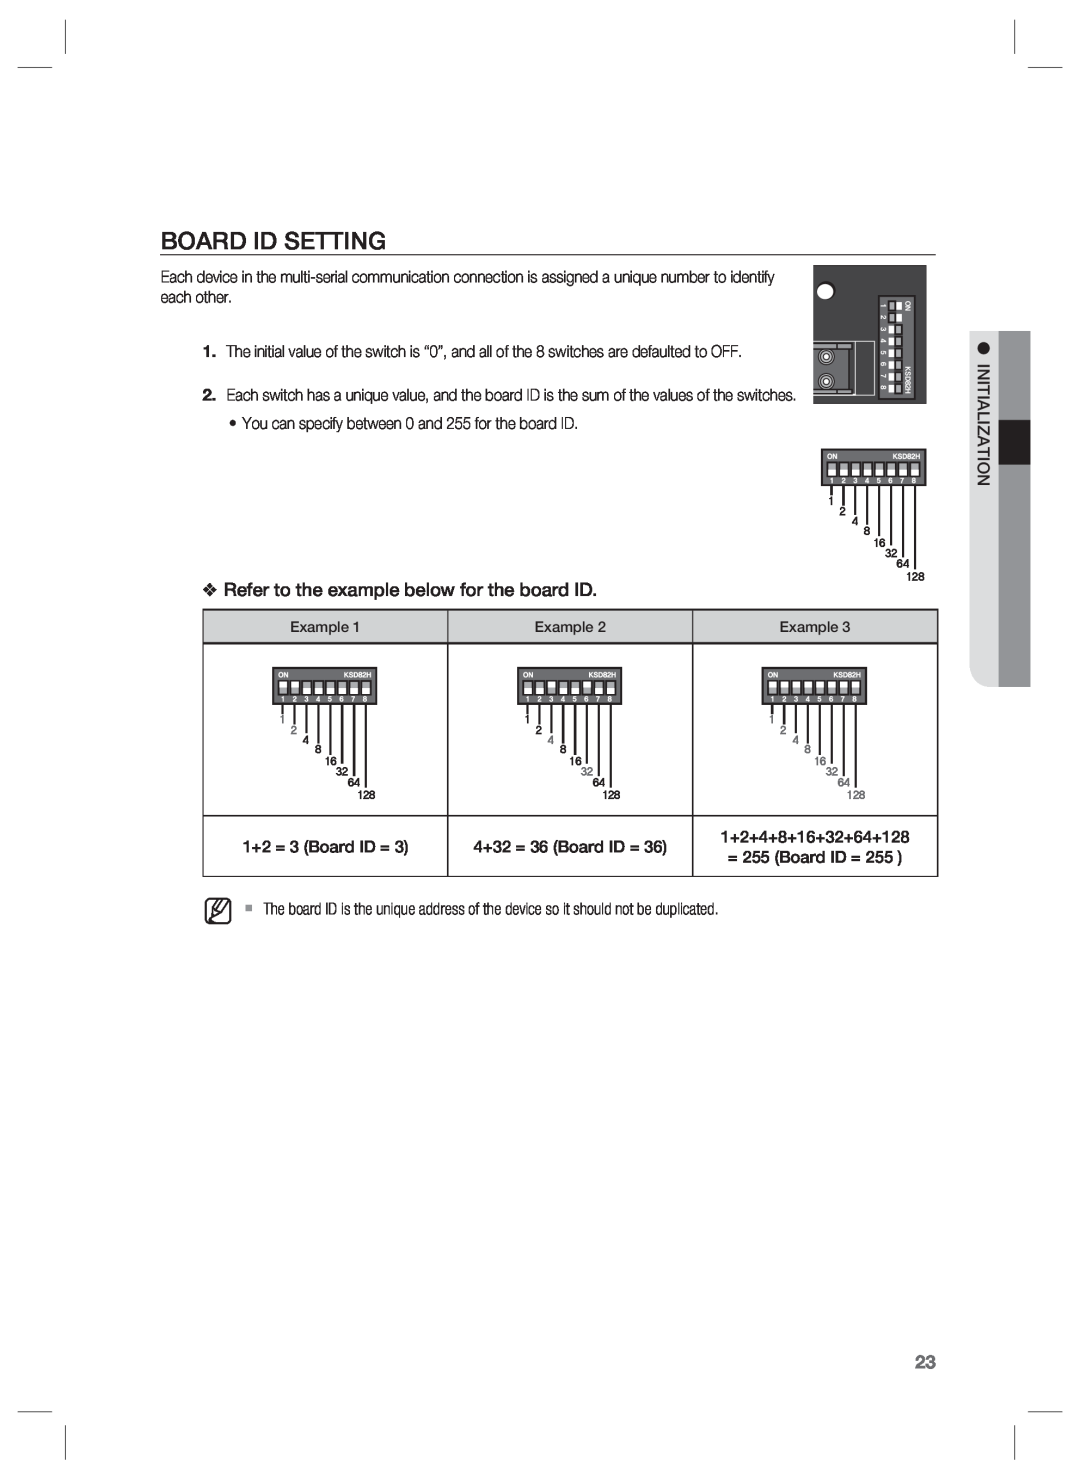 Samsung SSA-P400 Board Id Setting, Refer to the example below for the board ID, 1+2 = 3 Board ID =, 4+32 = 36 Board ID = 